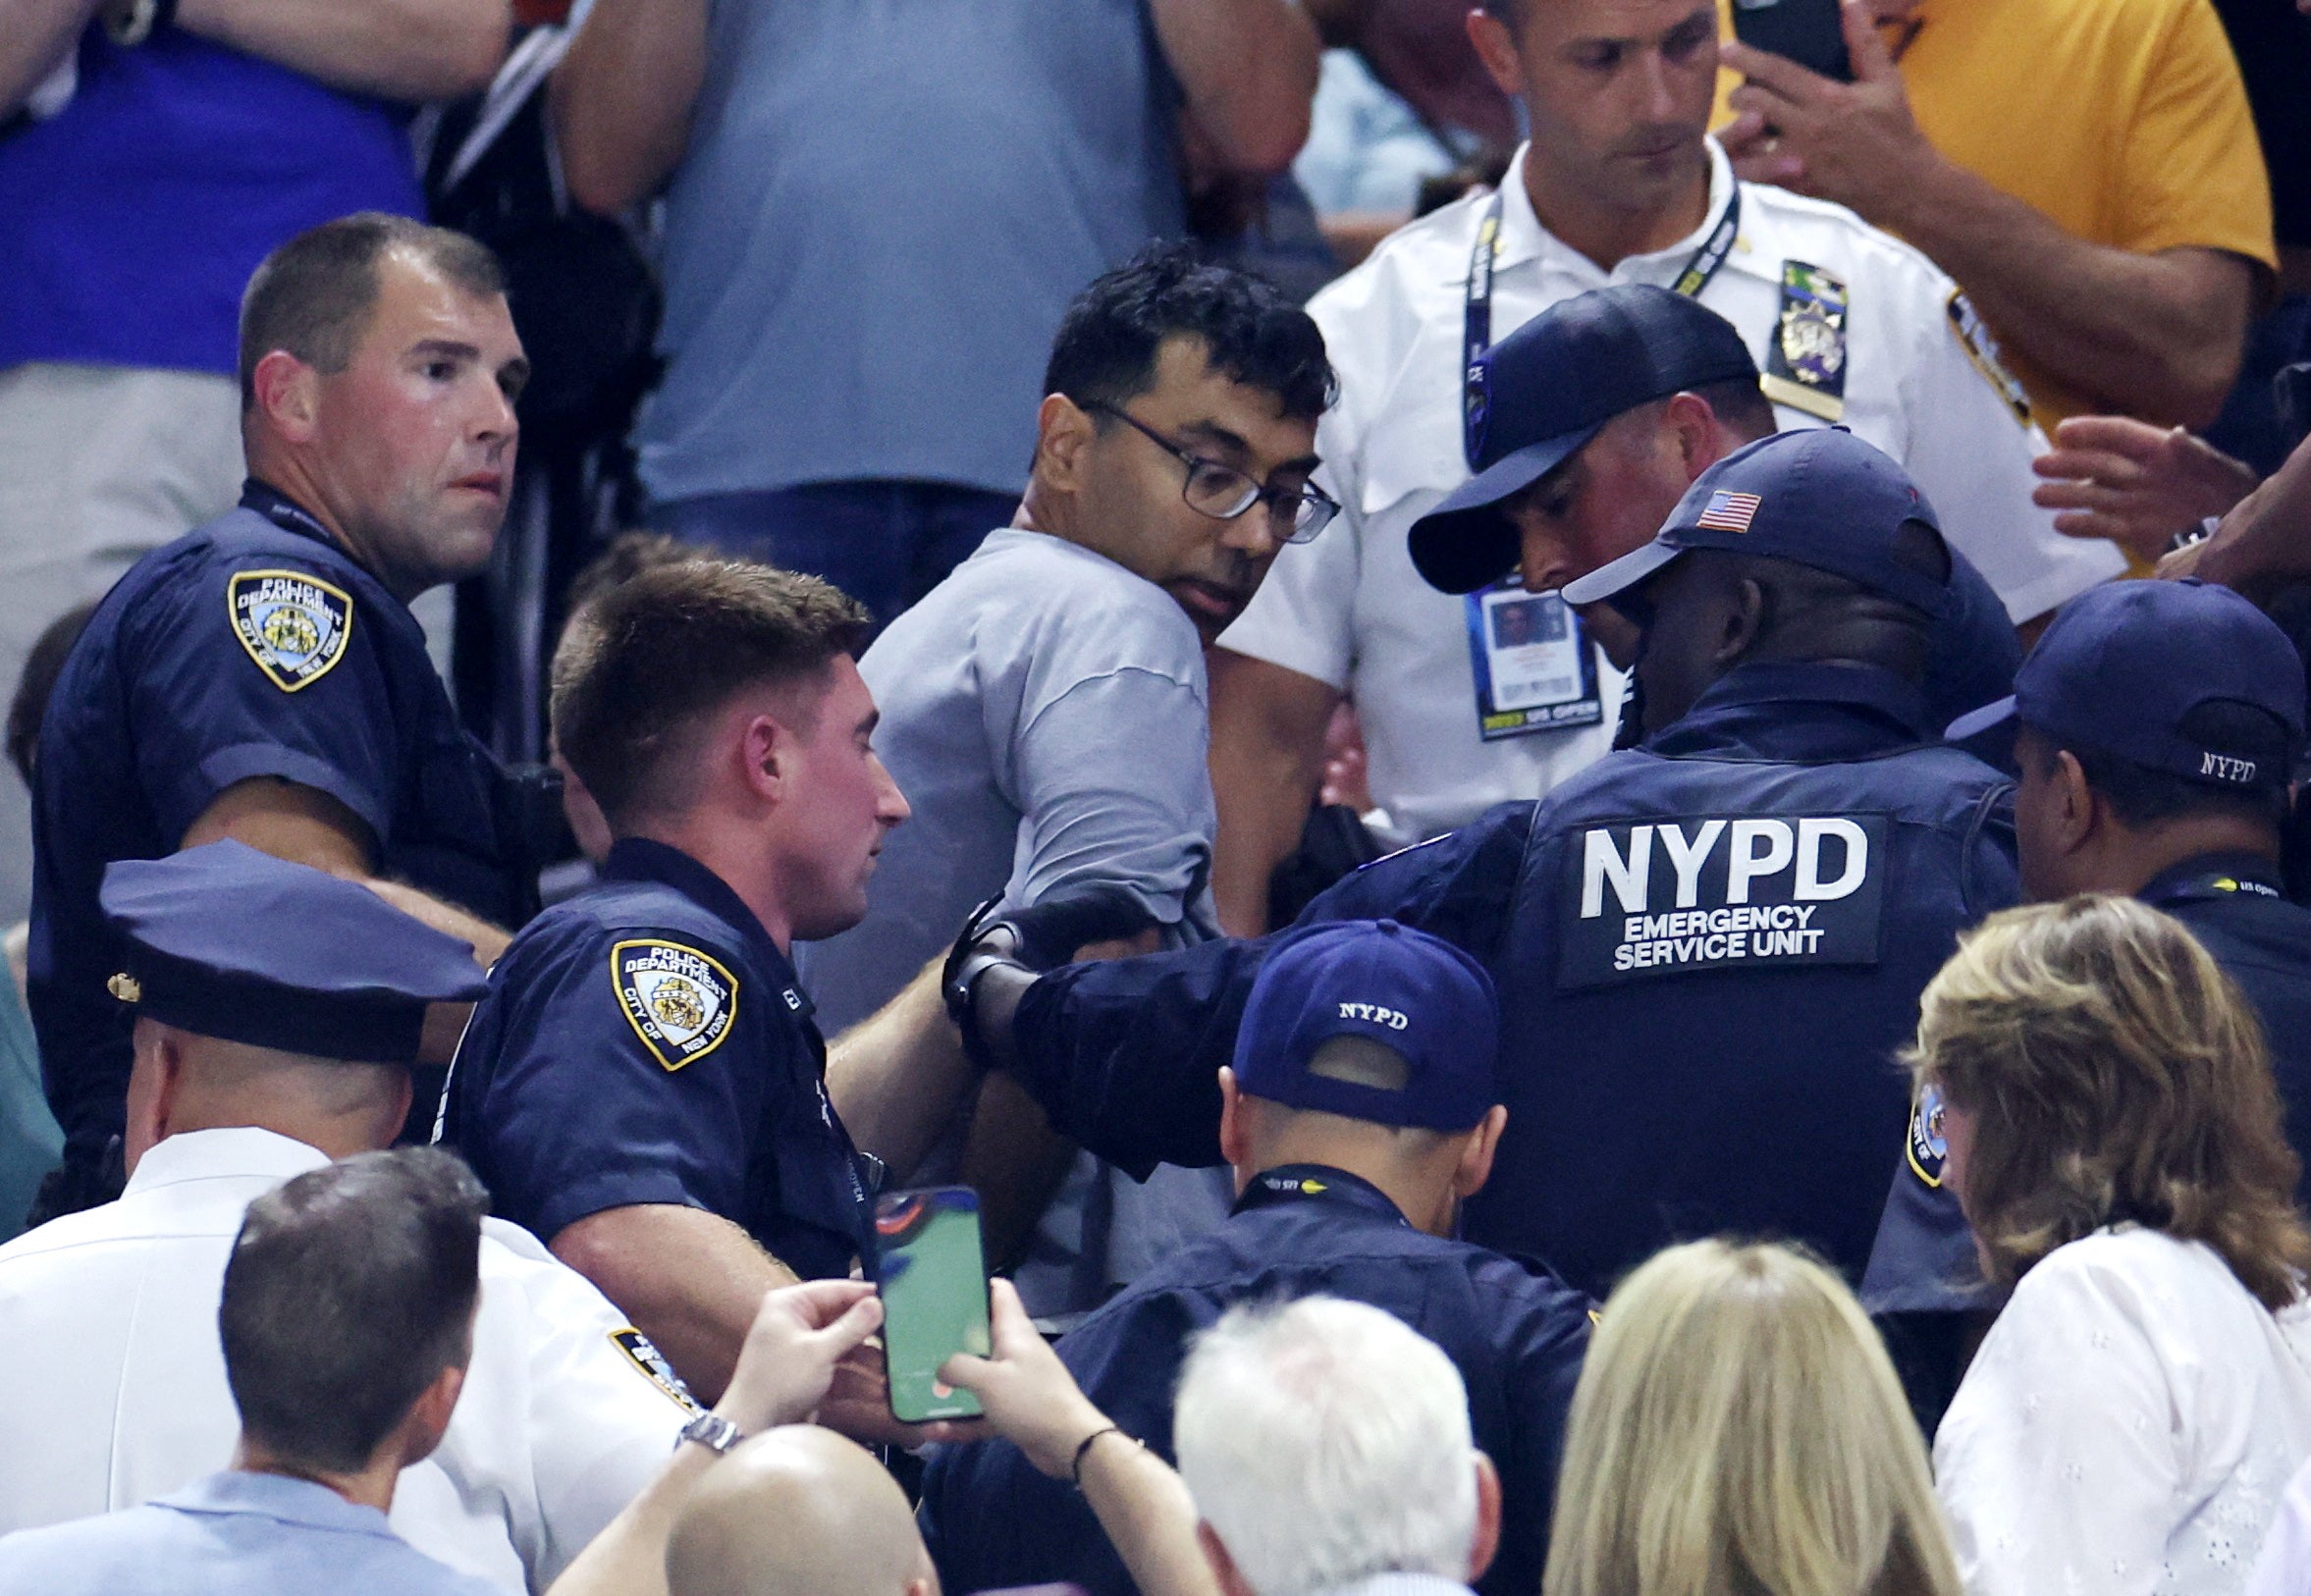 A demonstrator is removed from the Arthur Ashe Stadium by New York City Police